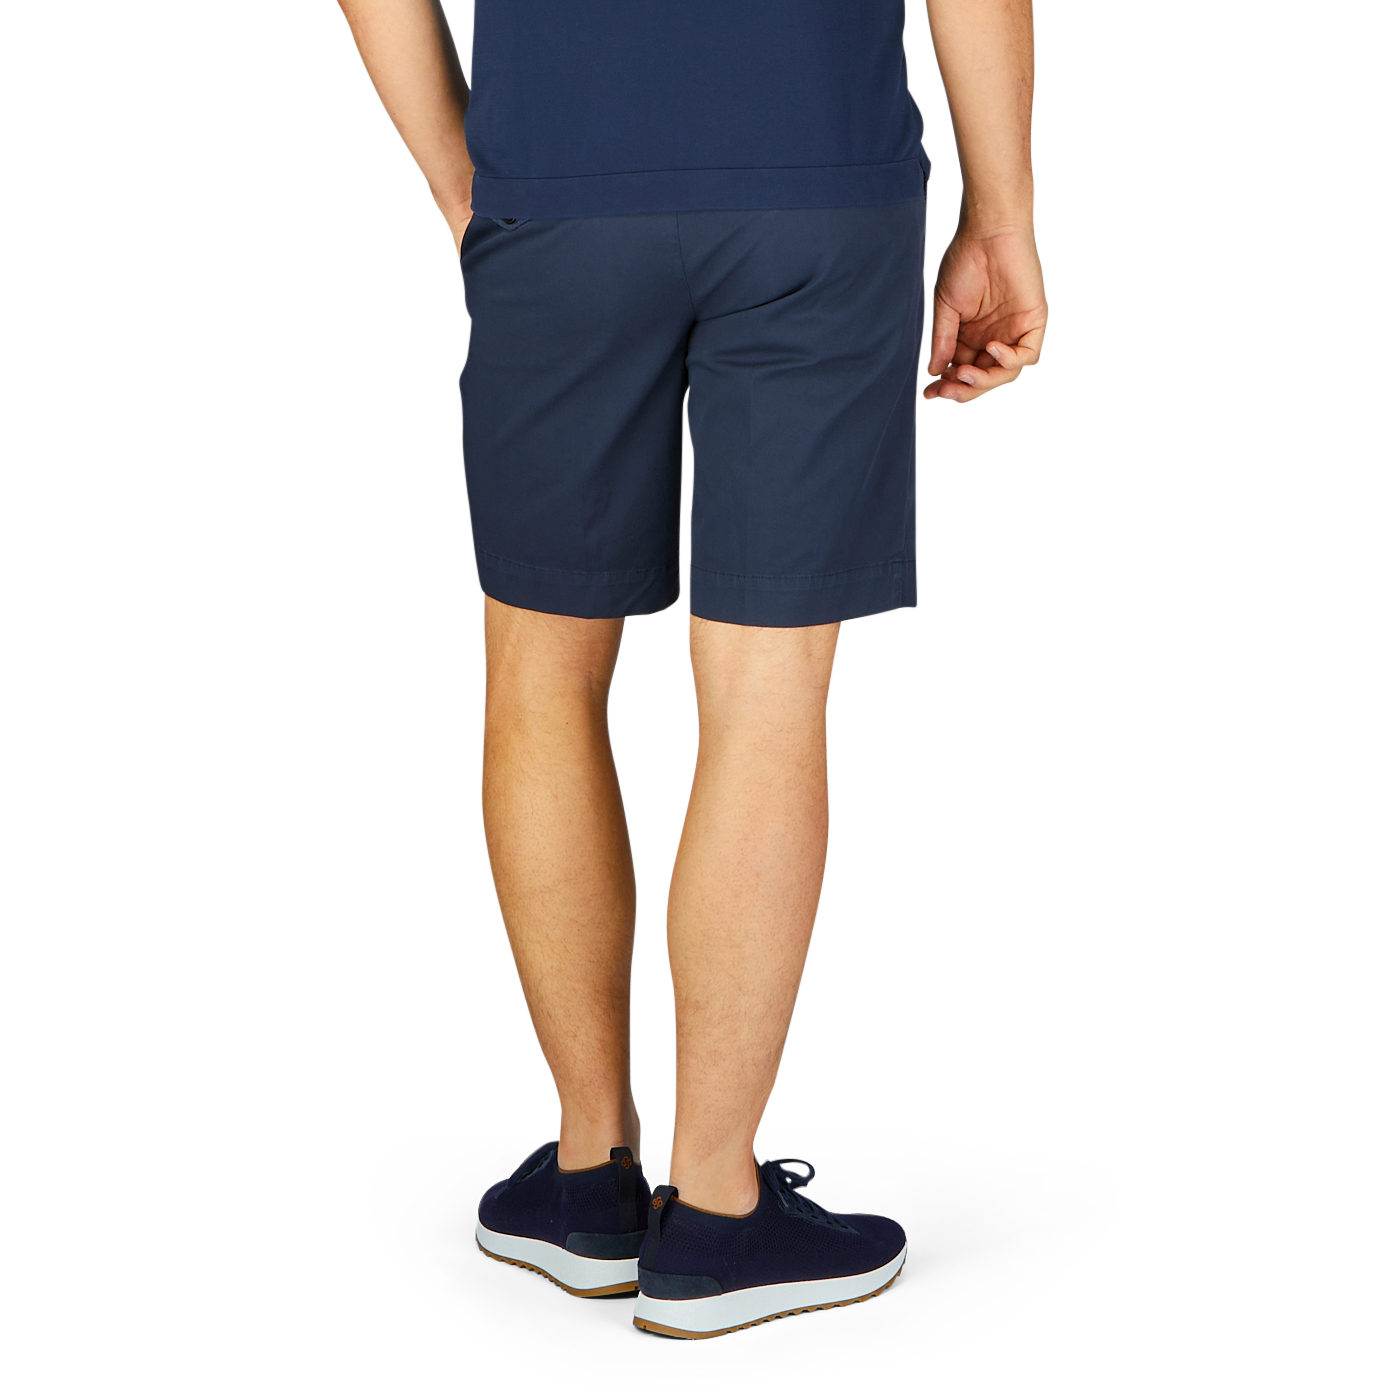 Man wearing Incotex navy blue cotton high comfort shorts and sneakers standing sideways.